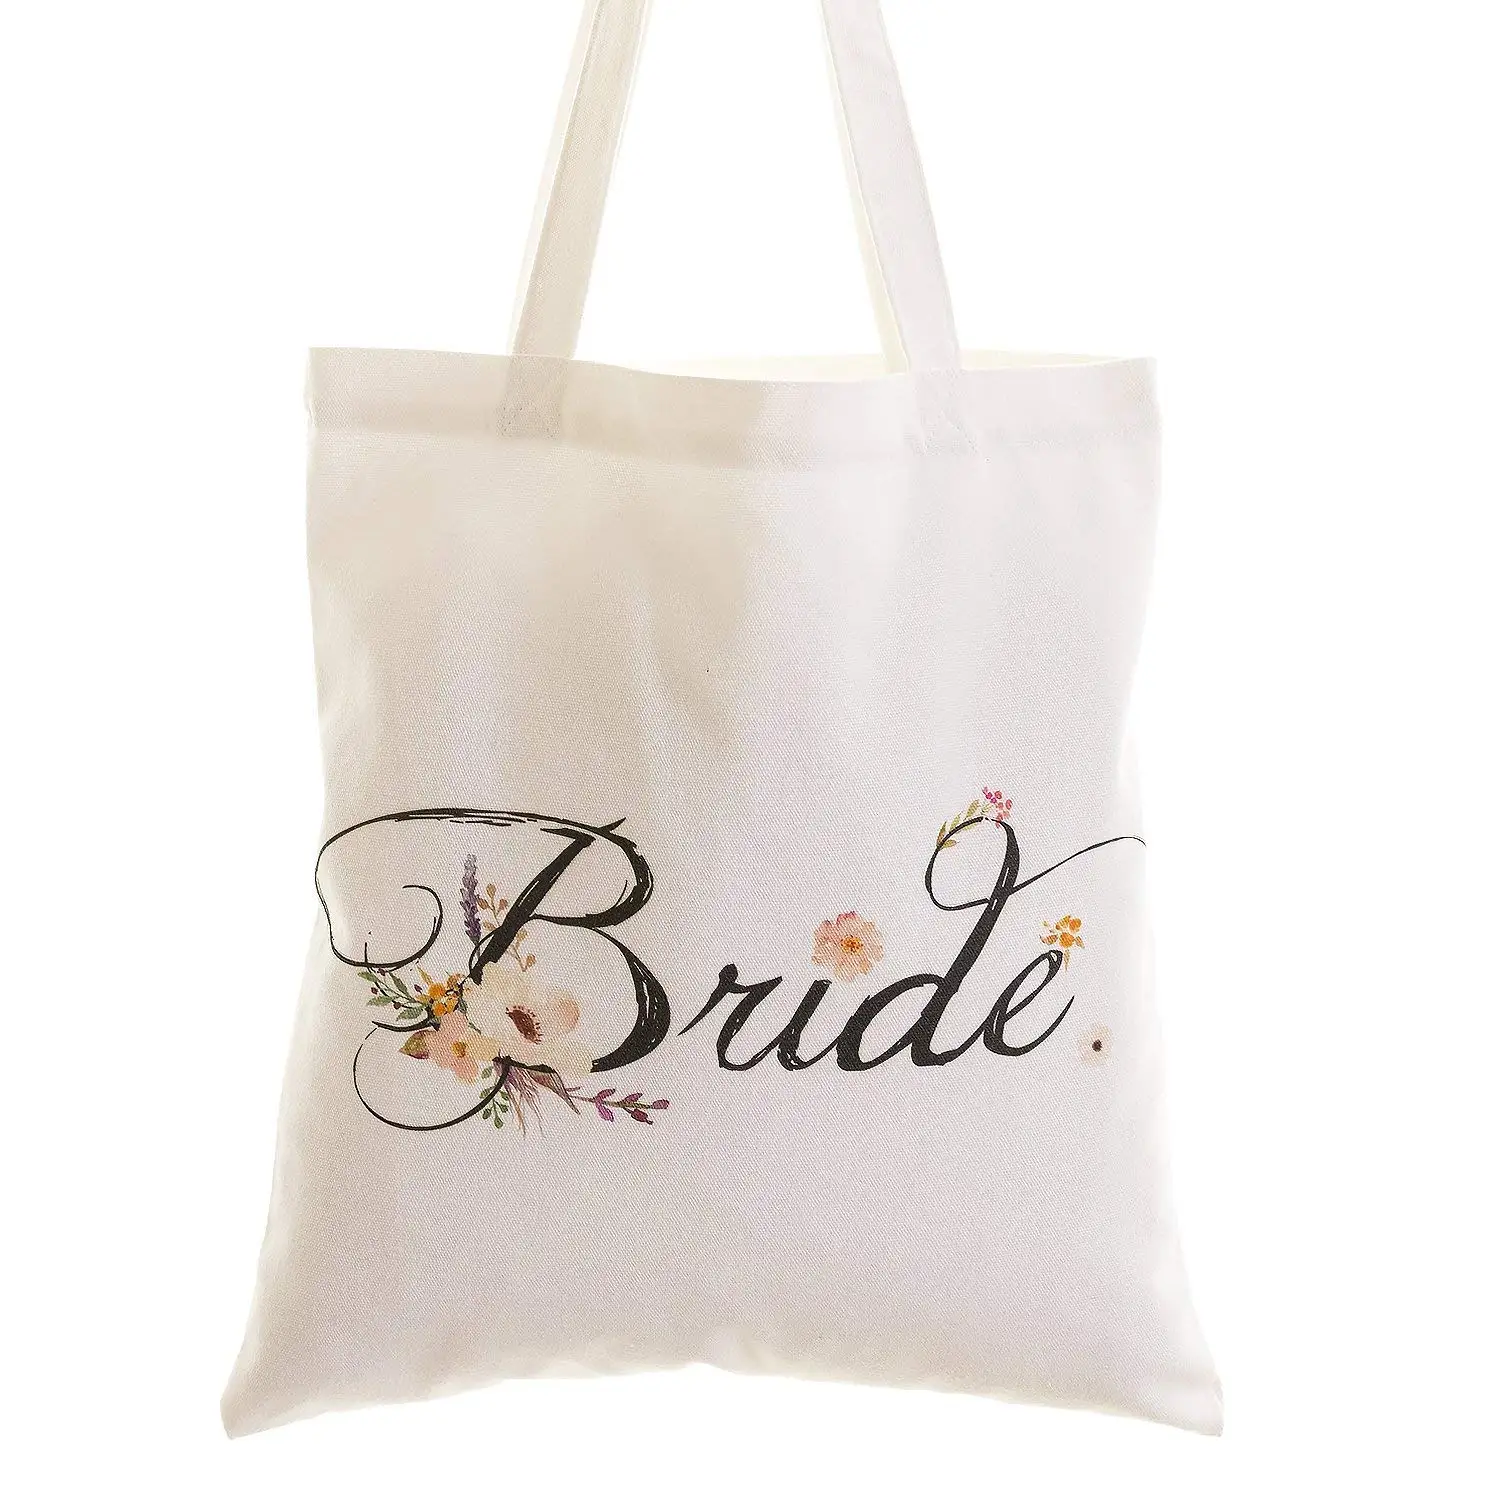 Cheap Wedding Canvas Tote Find Wedding Canvas Tote Deals On Line At